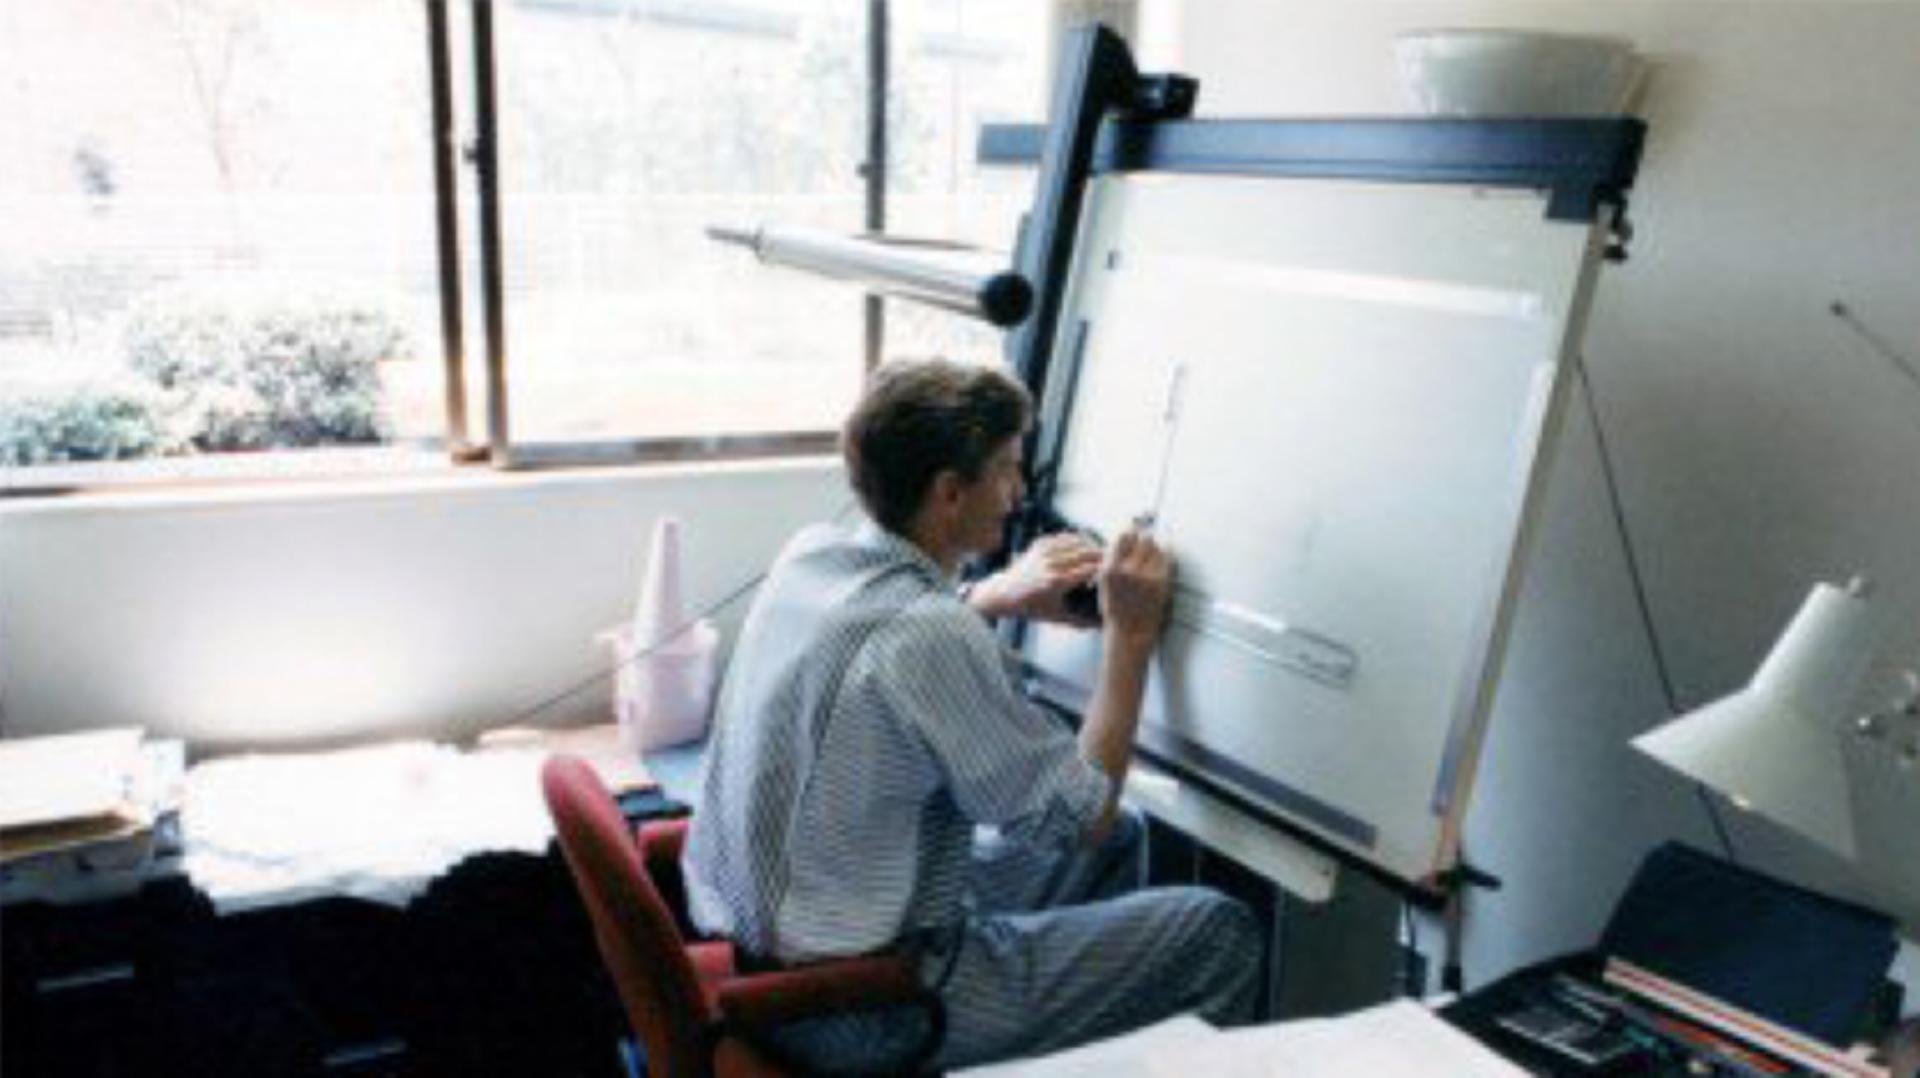 James Dyson seated in front of a technical drawing board